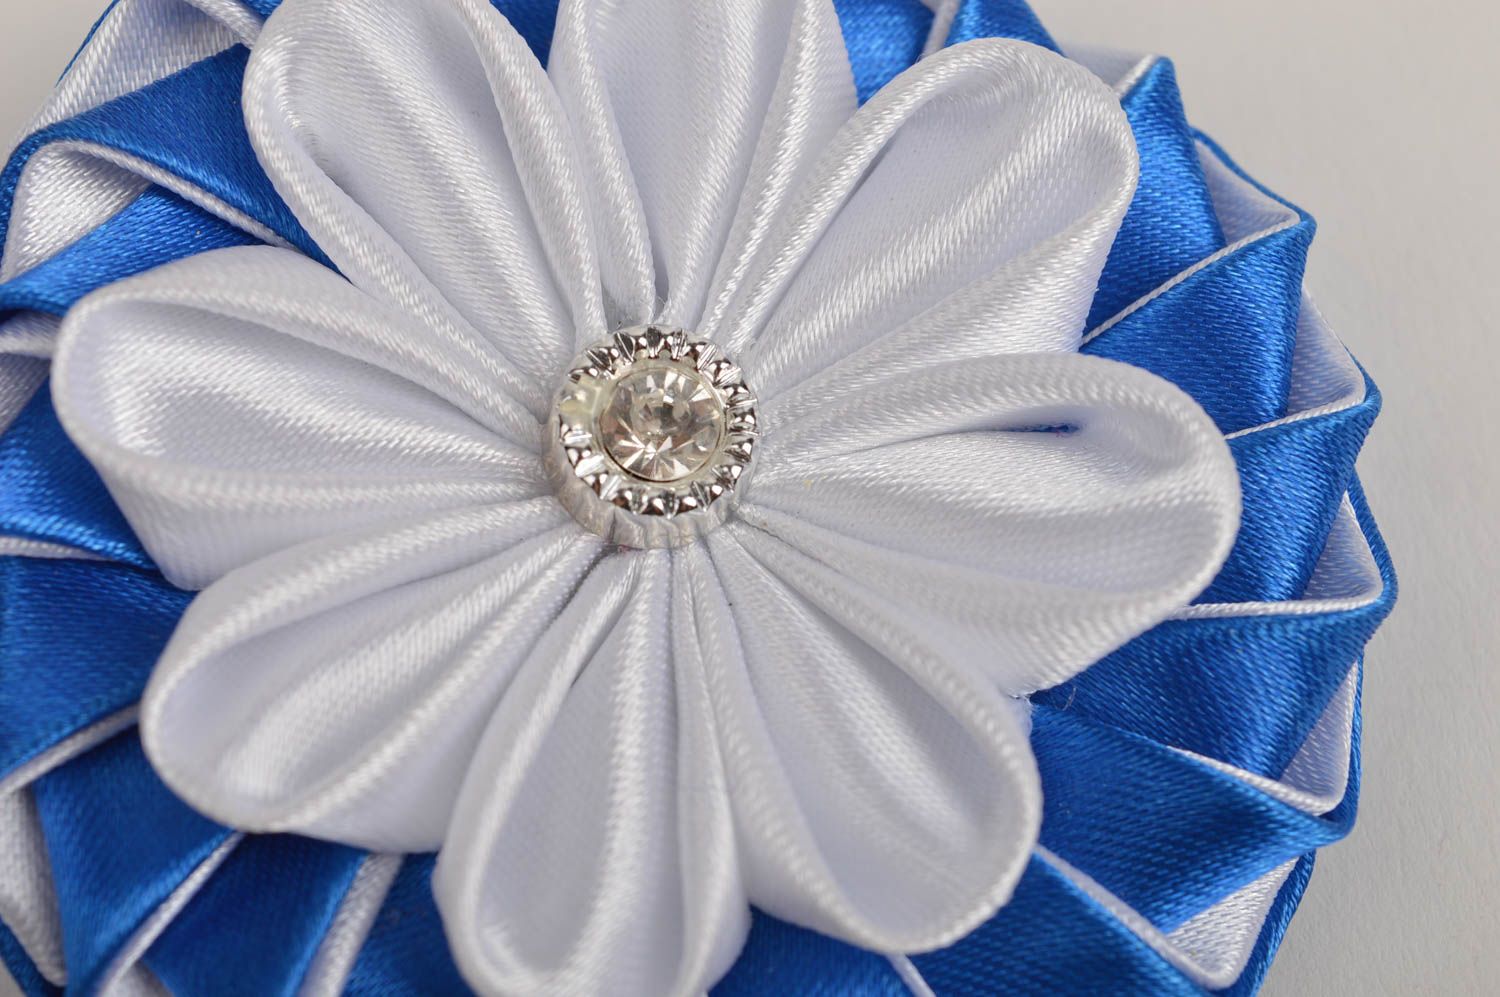 Beautiful handmade textile barrette kanzashi flower hair clip gifts for her photo 5